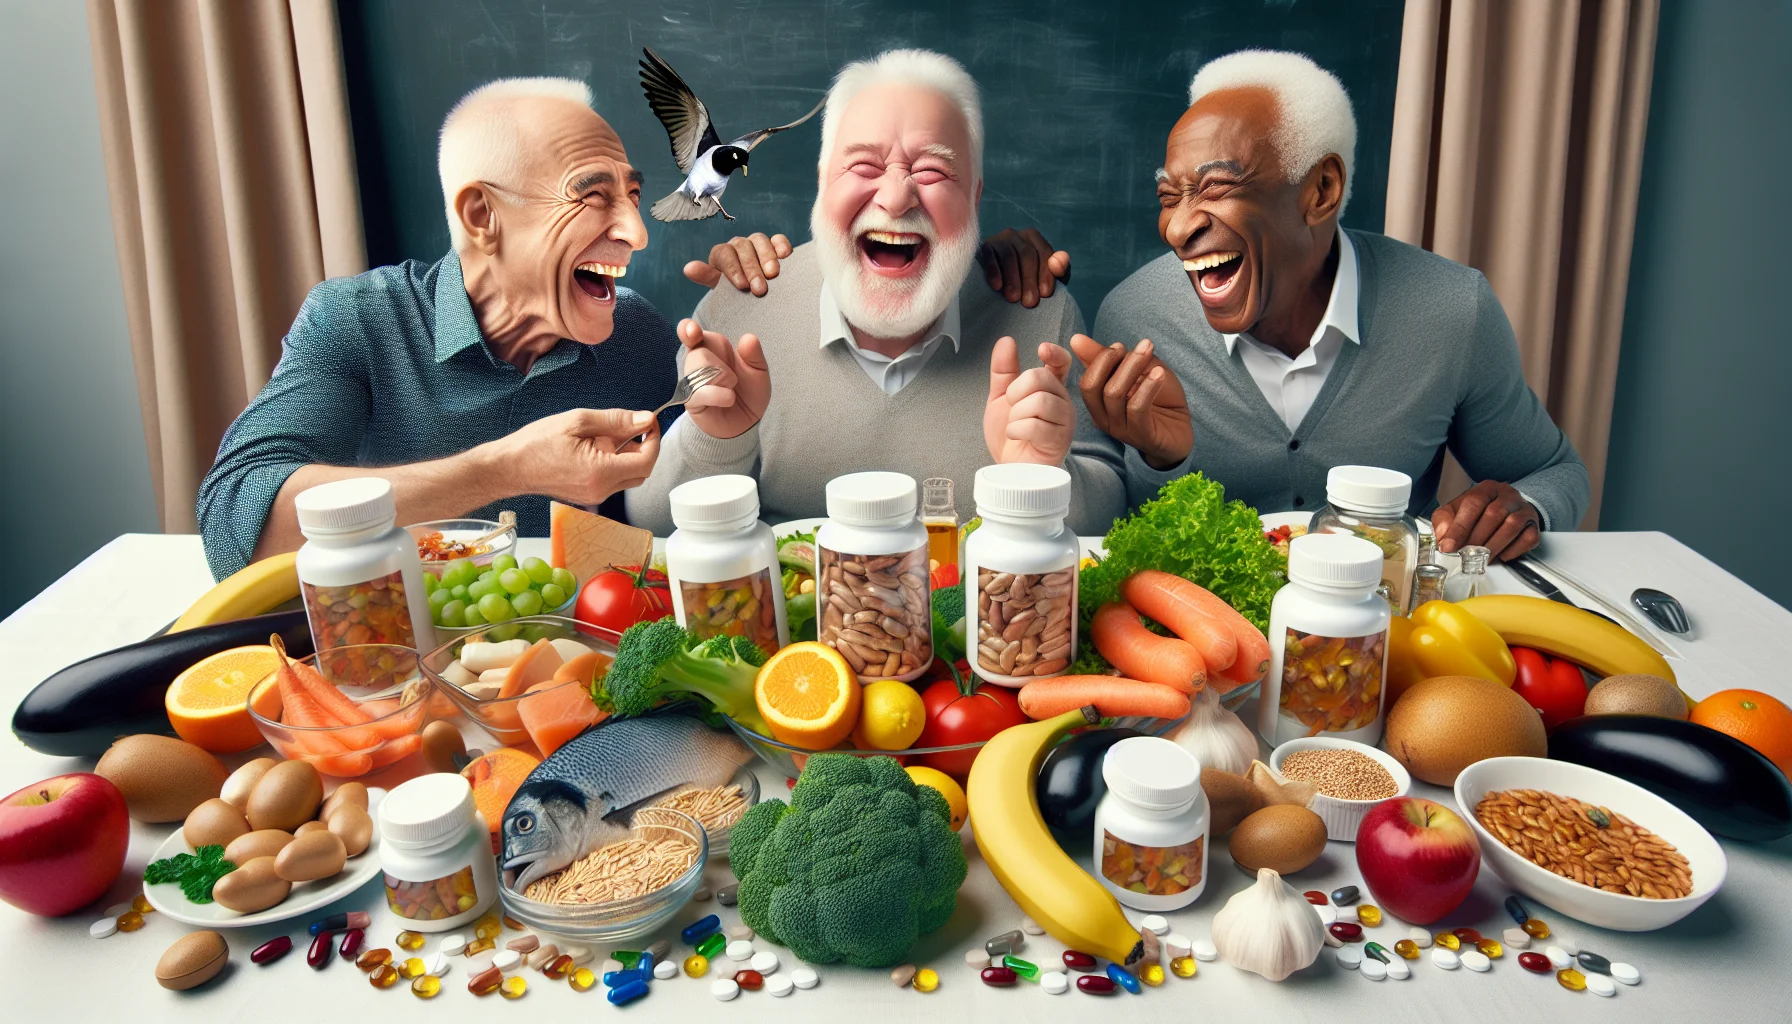 Create a humorous yet realistic image of three older men, each of different descents - Caucasian, Black, and Hispanic, enjoying a hearty laugher together. They are gathered around a dinner table filled with assorted healthy food items such as vegetables, fruits, grains, and fish. Around these food items, creatively placed are transparent pill bottles with large, caps-lock labels claiming to be 'BEST SUPPLEMENTS FOR MEN OVER 50'. Also incorporate funny elements associated with old age, like a misplaced set of dentures on the table, a misplaced reading glasses, or a playful pet bird trying to fly off with a supplement bottle cap.